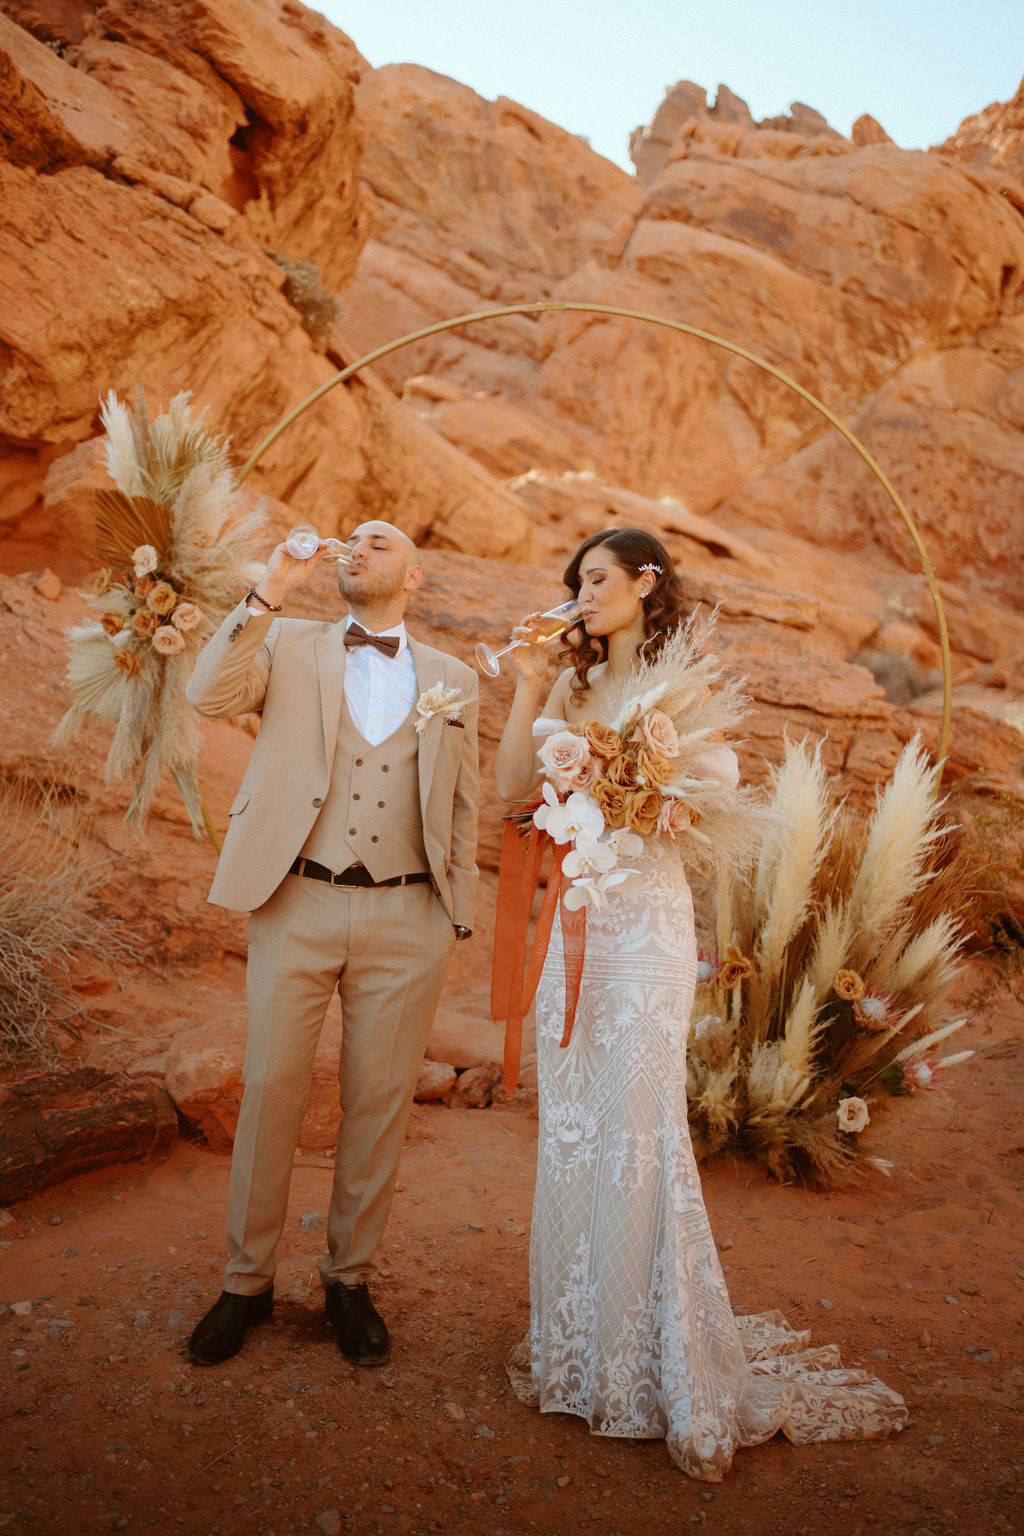 Groom in all tan suite and bowtie drinking champagne with bride in detailed lace dress for boho elopement. International Couples! Welcome to the desert!